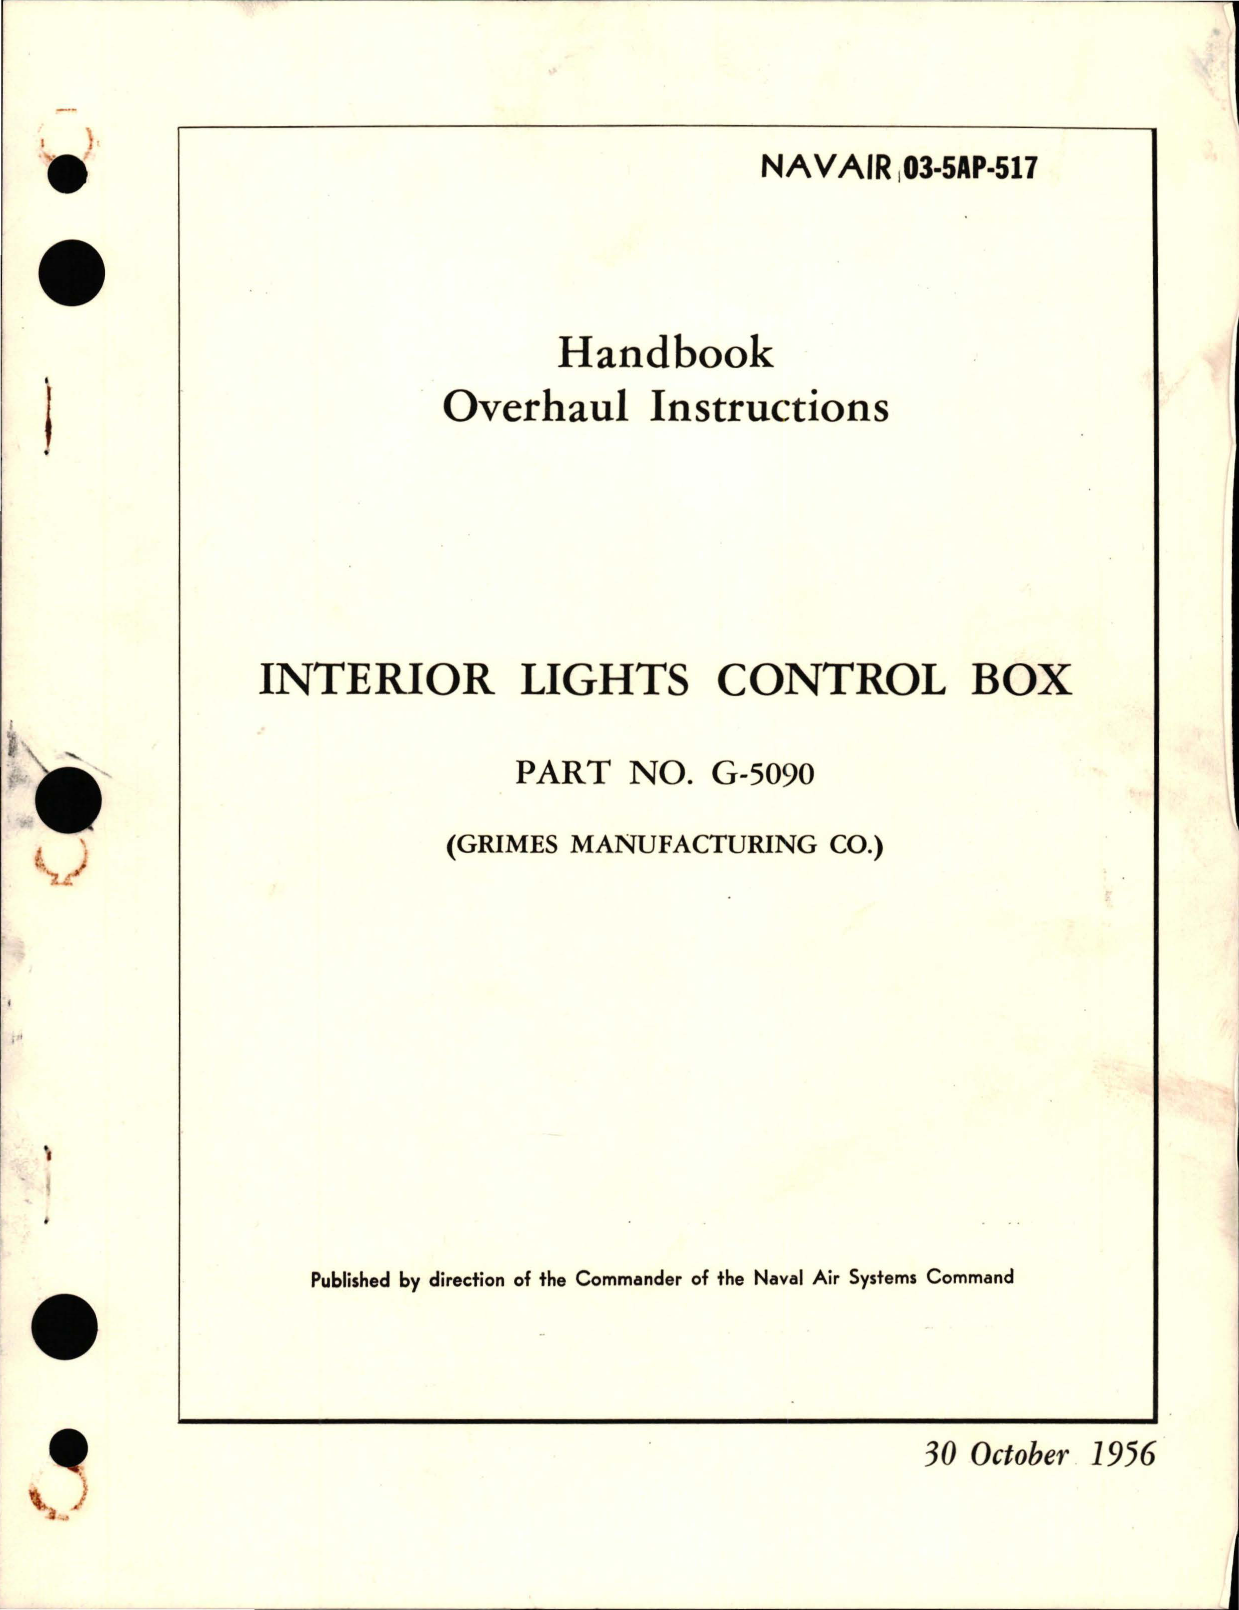 Sample page 1 from AirCorps Library document: Overhaul Instructions for Interior Light Control Box - Part G-5090 